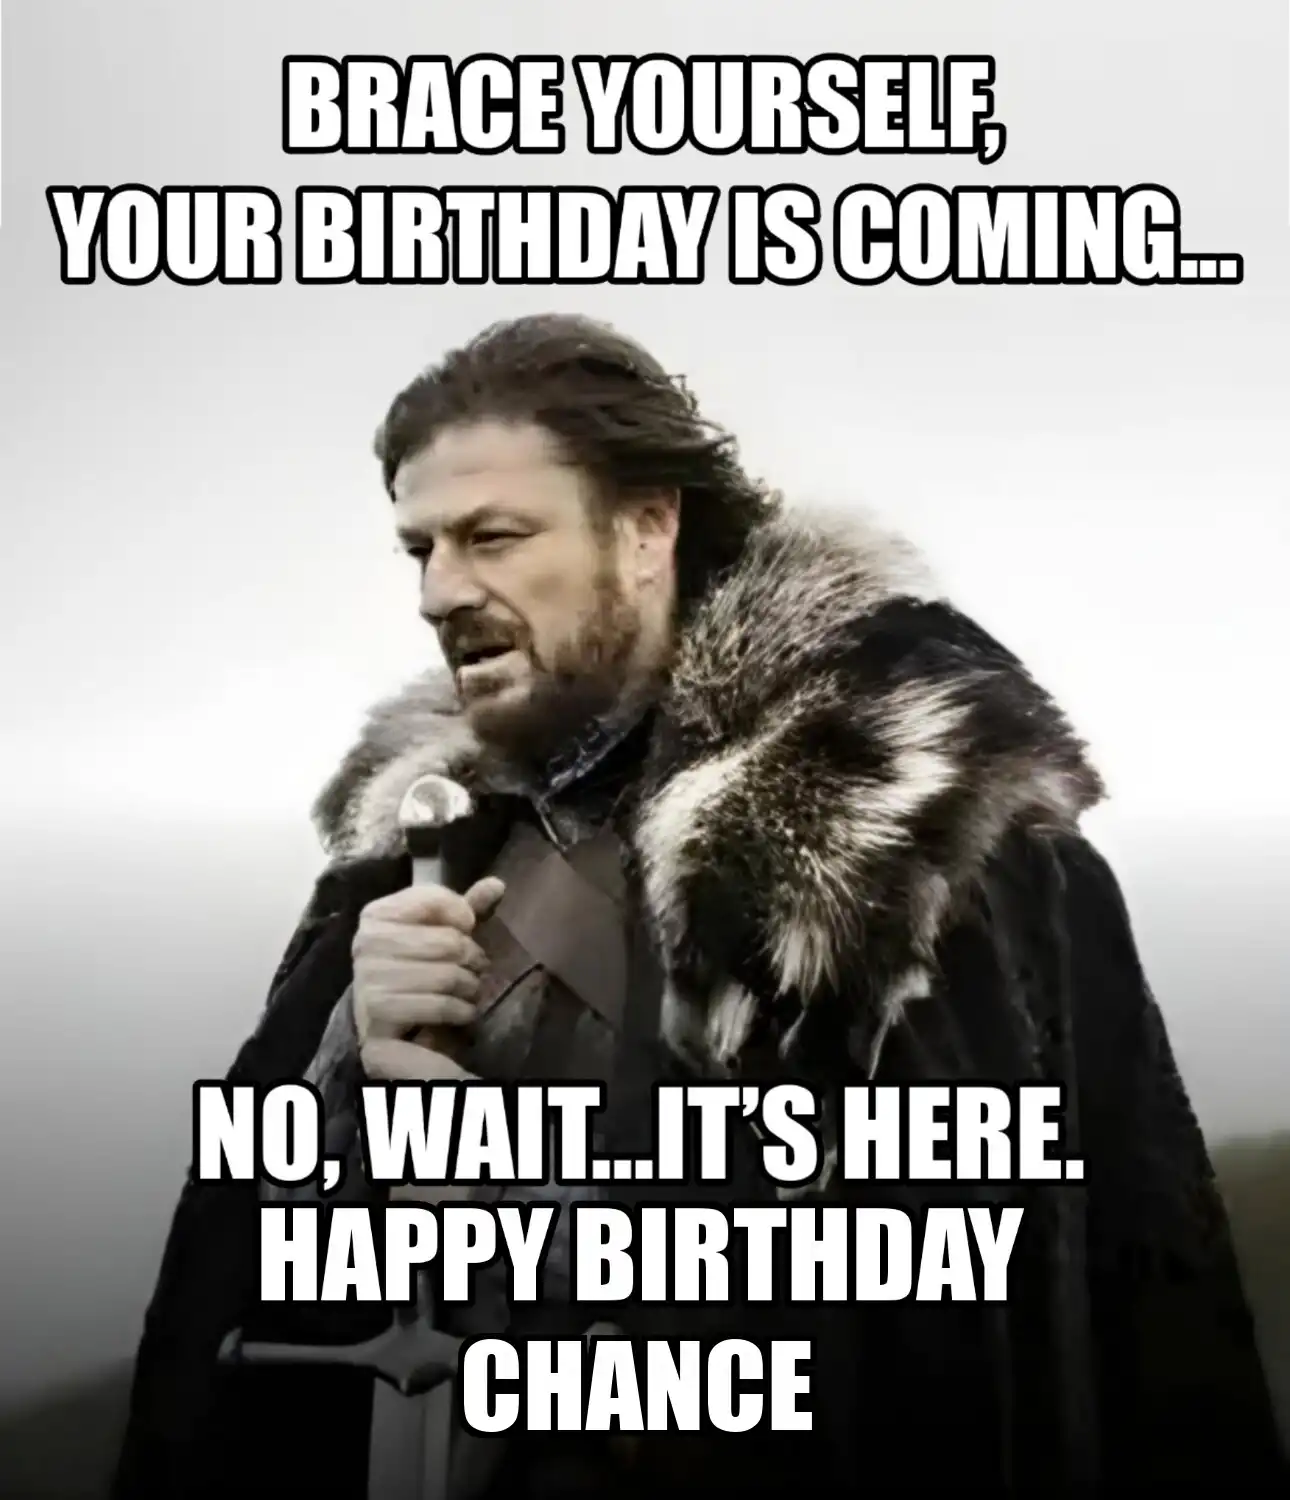 Happy Birthday Chance Brace Yourself Your Birthday Is Coming Meme